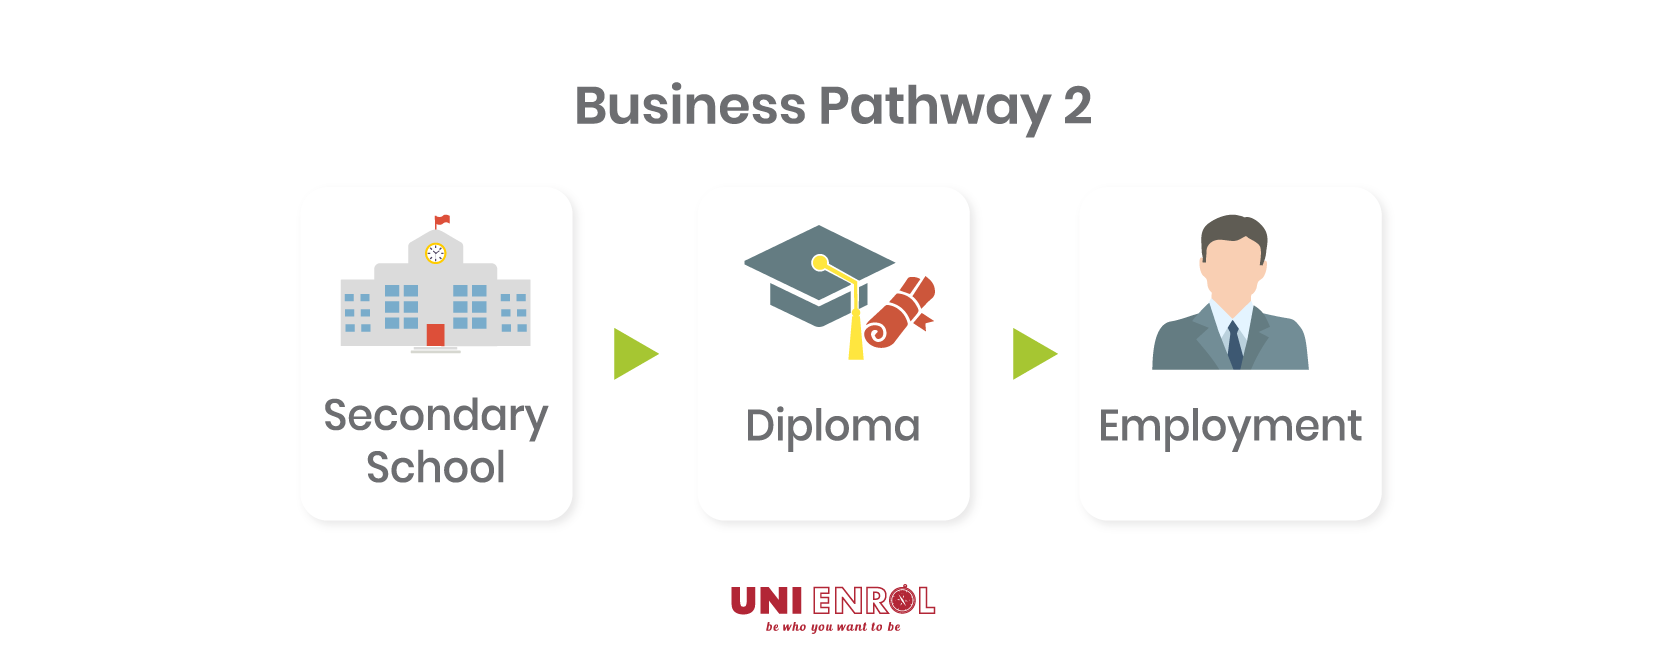 Contact our Uni Enrol counsellors to find out more about business diploma courses.